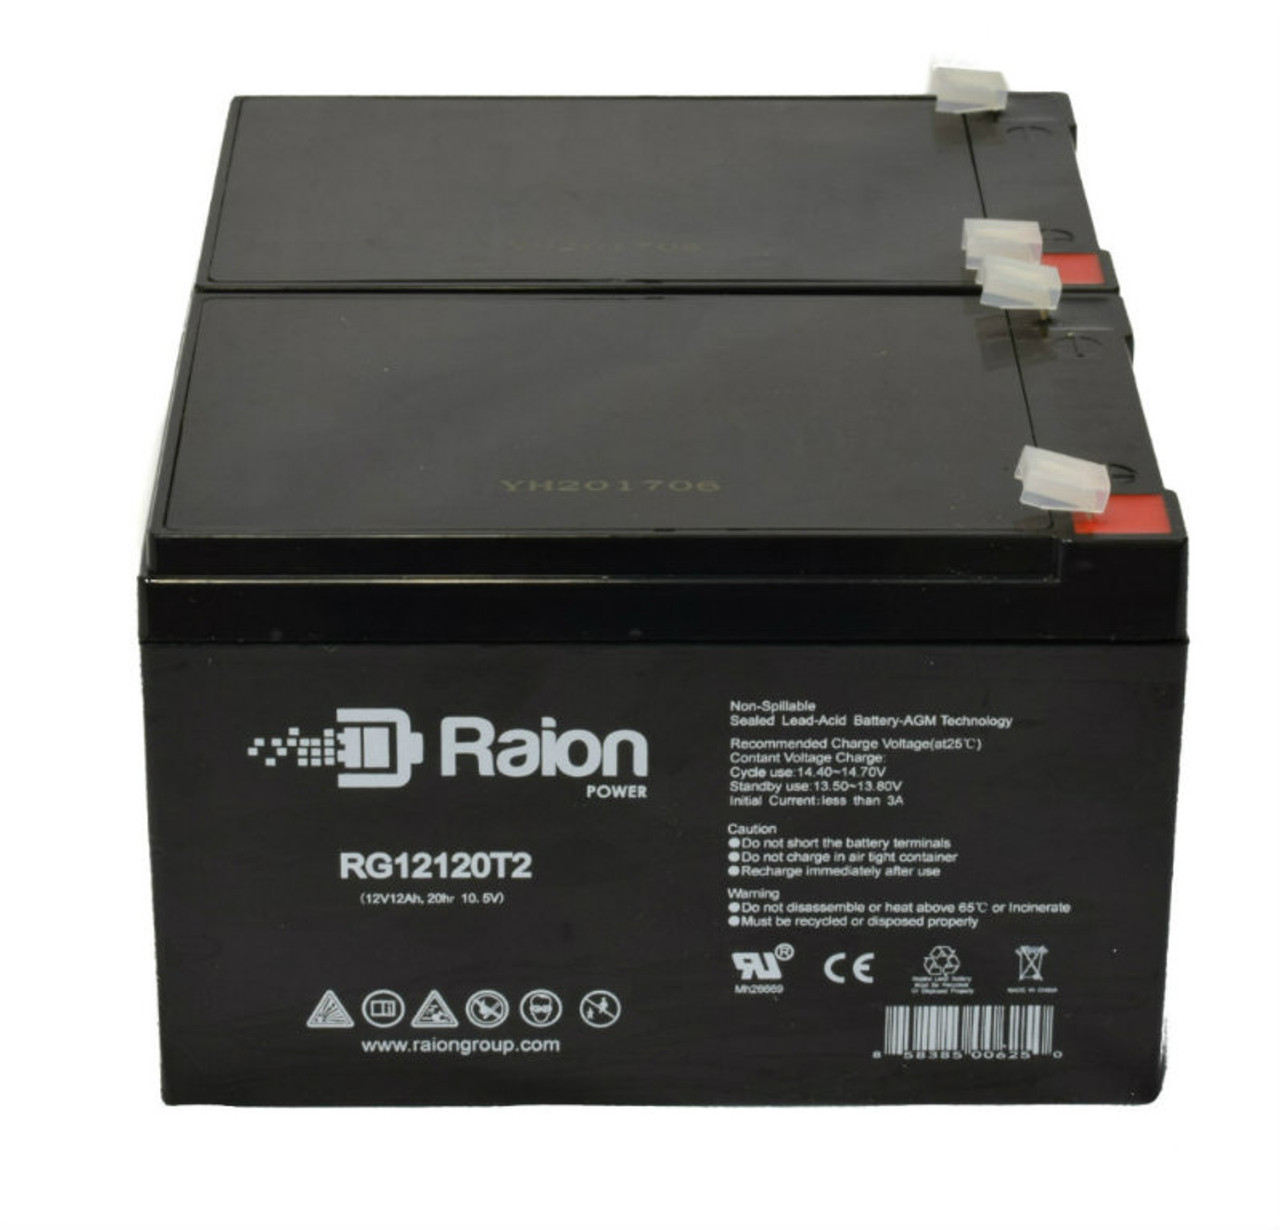 Raion Power 12V 12Ah Non-Spillable Compatible Replacement Battery for CBB NP12-12 - (2 Pack)